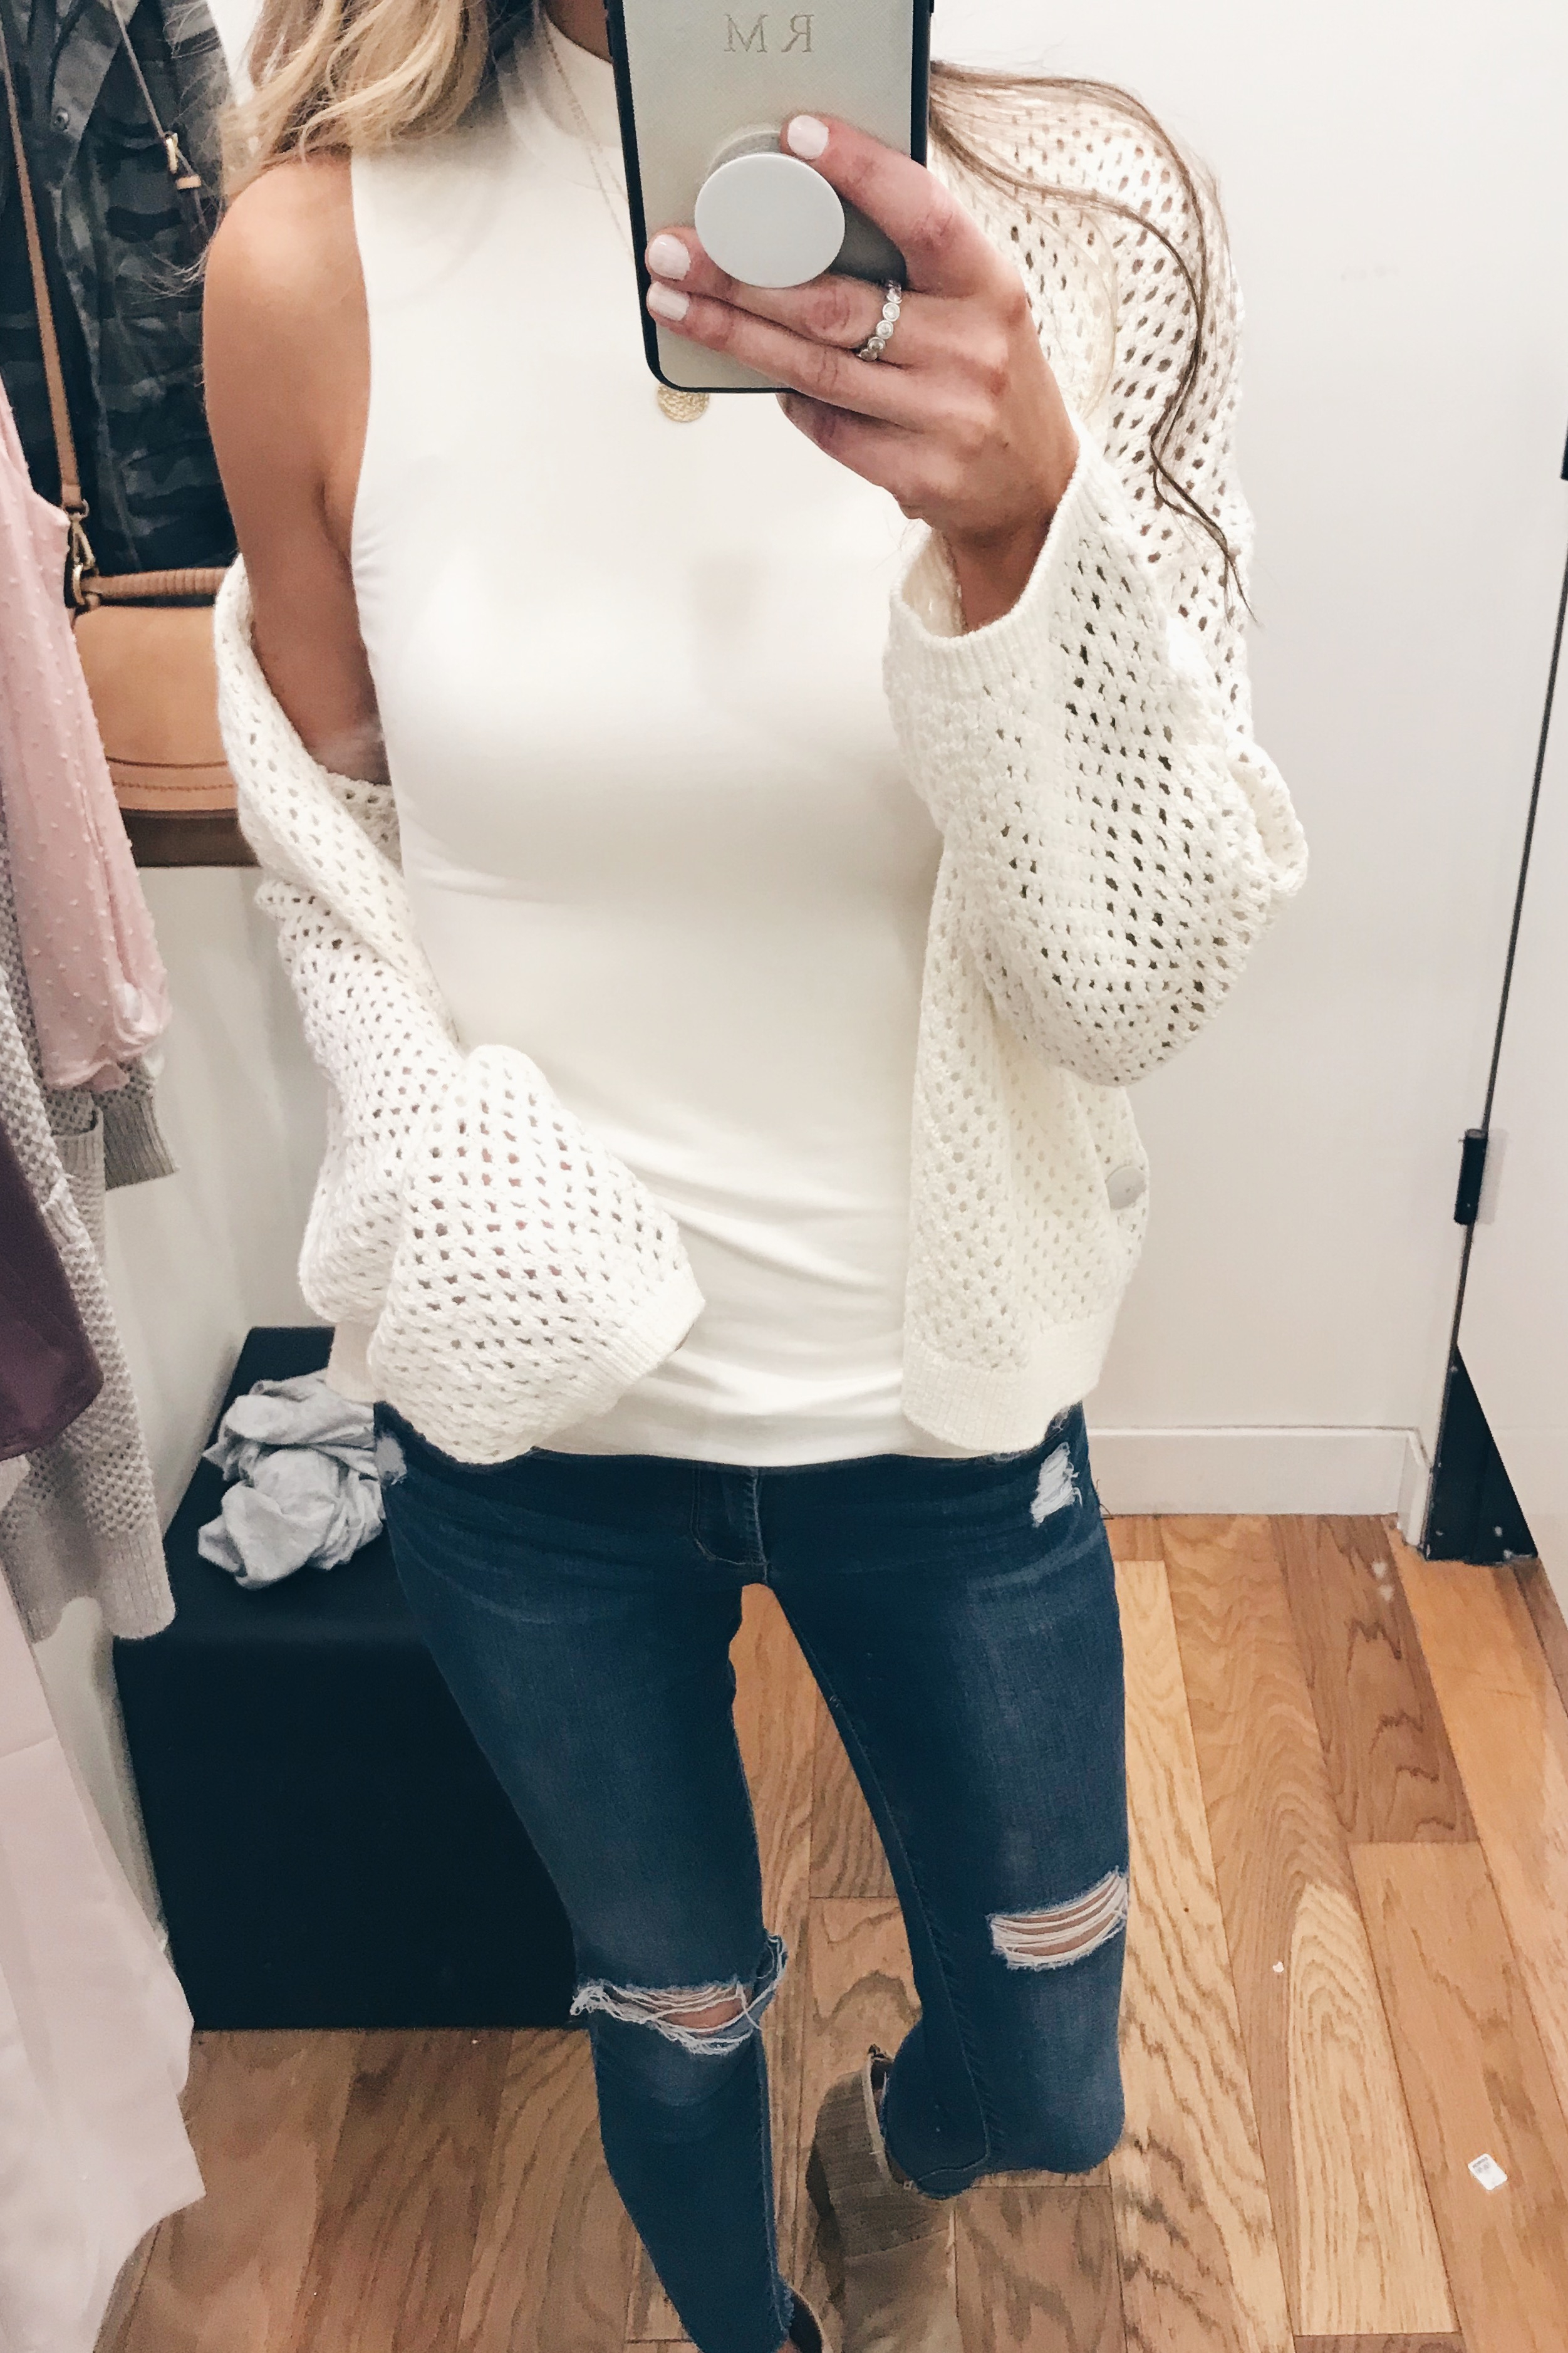 express sale try on 2019 - open knit cardigan and mock neck tank on Pinteresting Plans blog